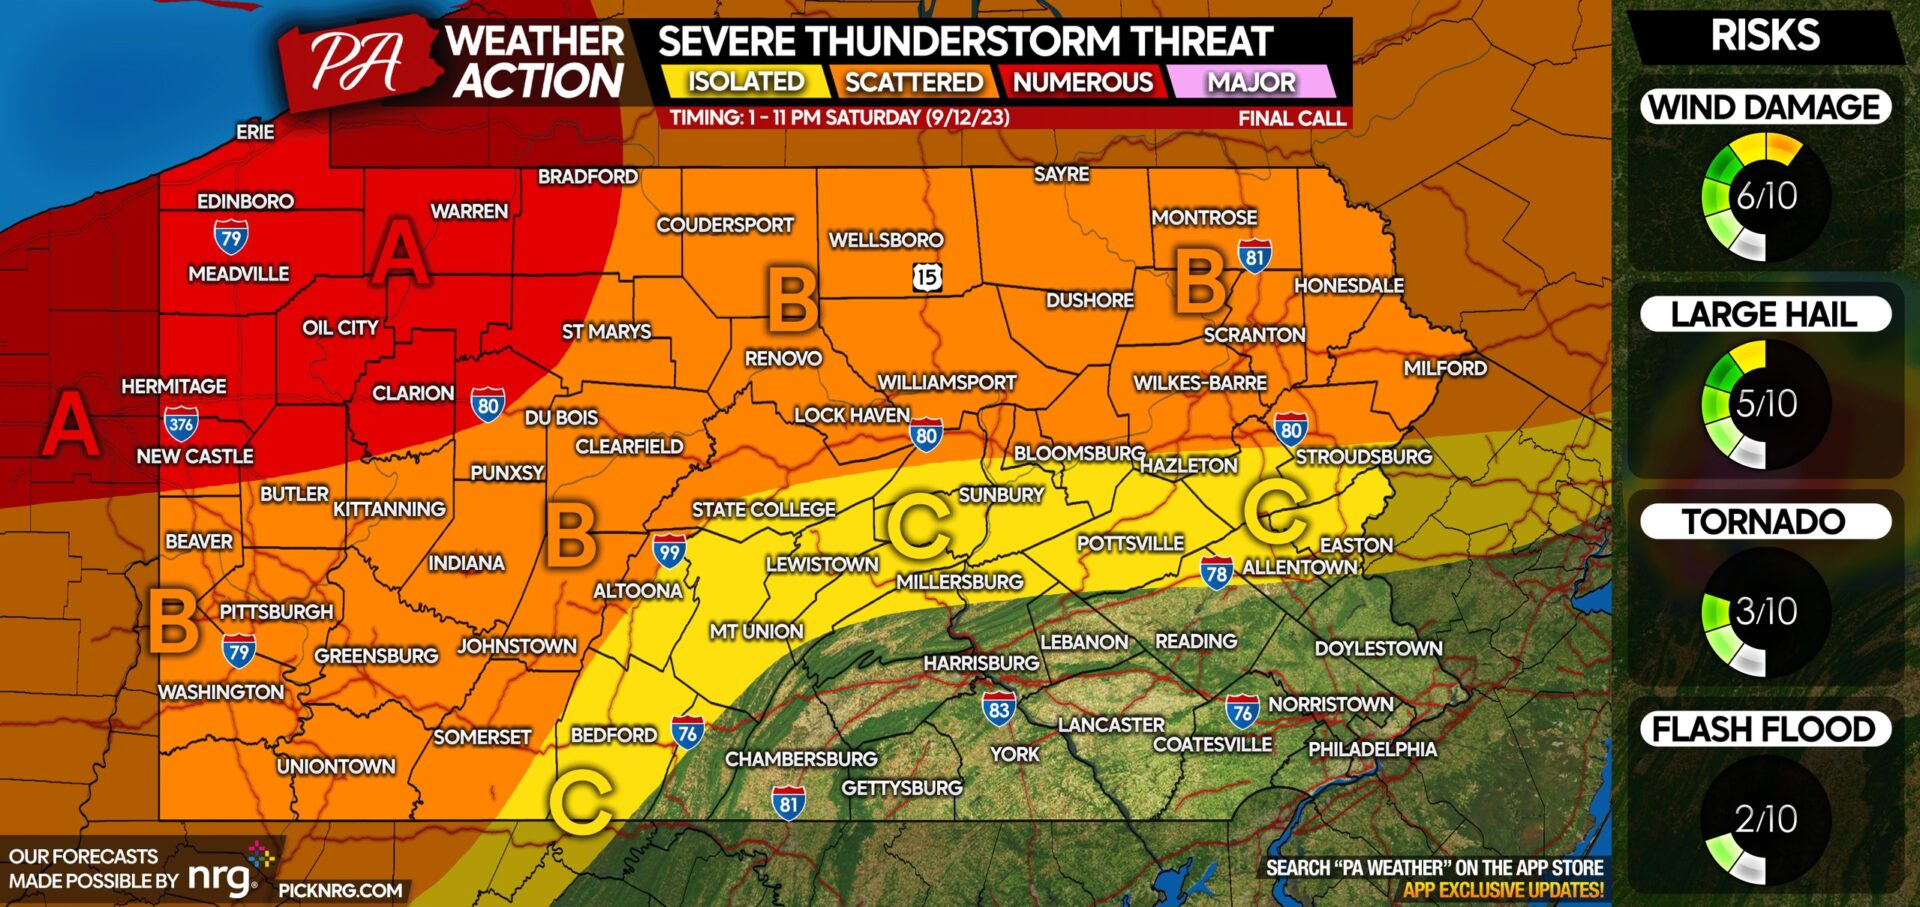 Scattered to Numerous Severe Thunderstorms Expected Saturday Across Parts of Pennsylvania